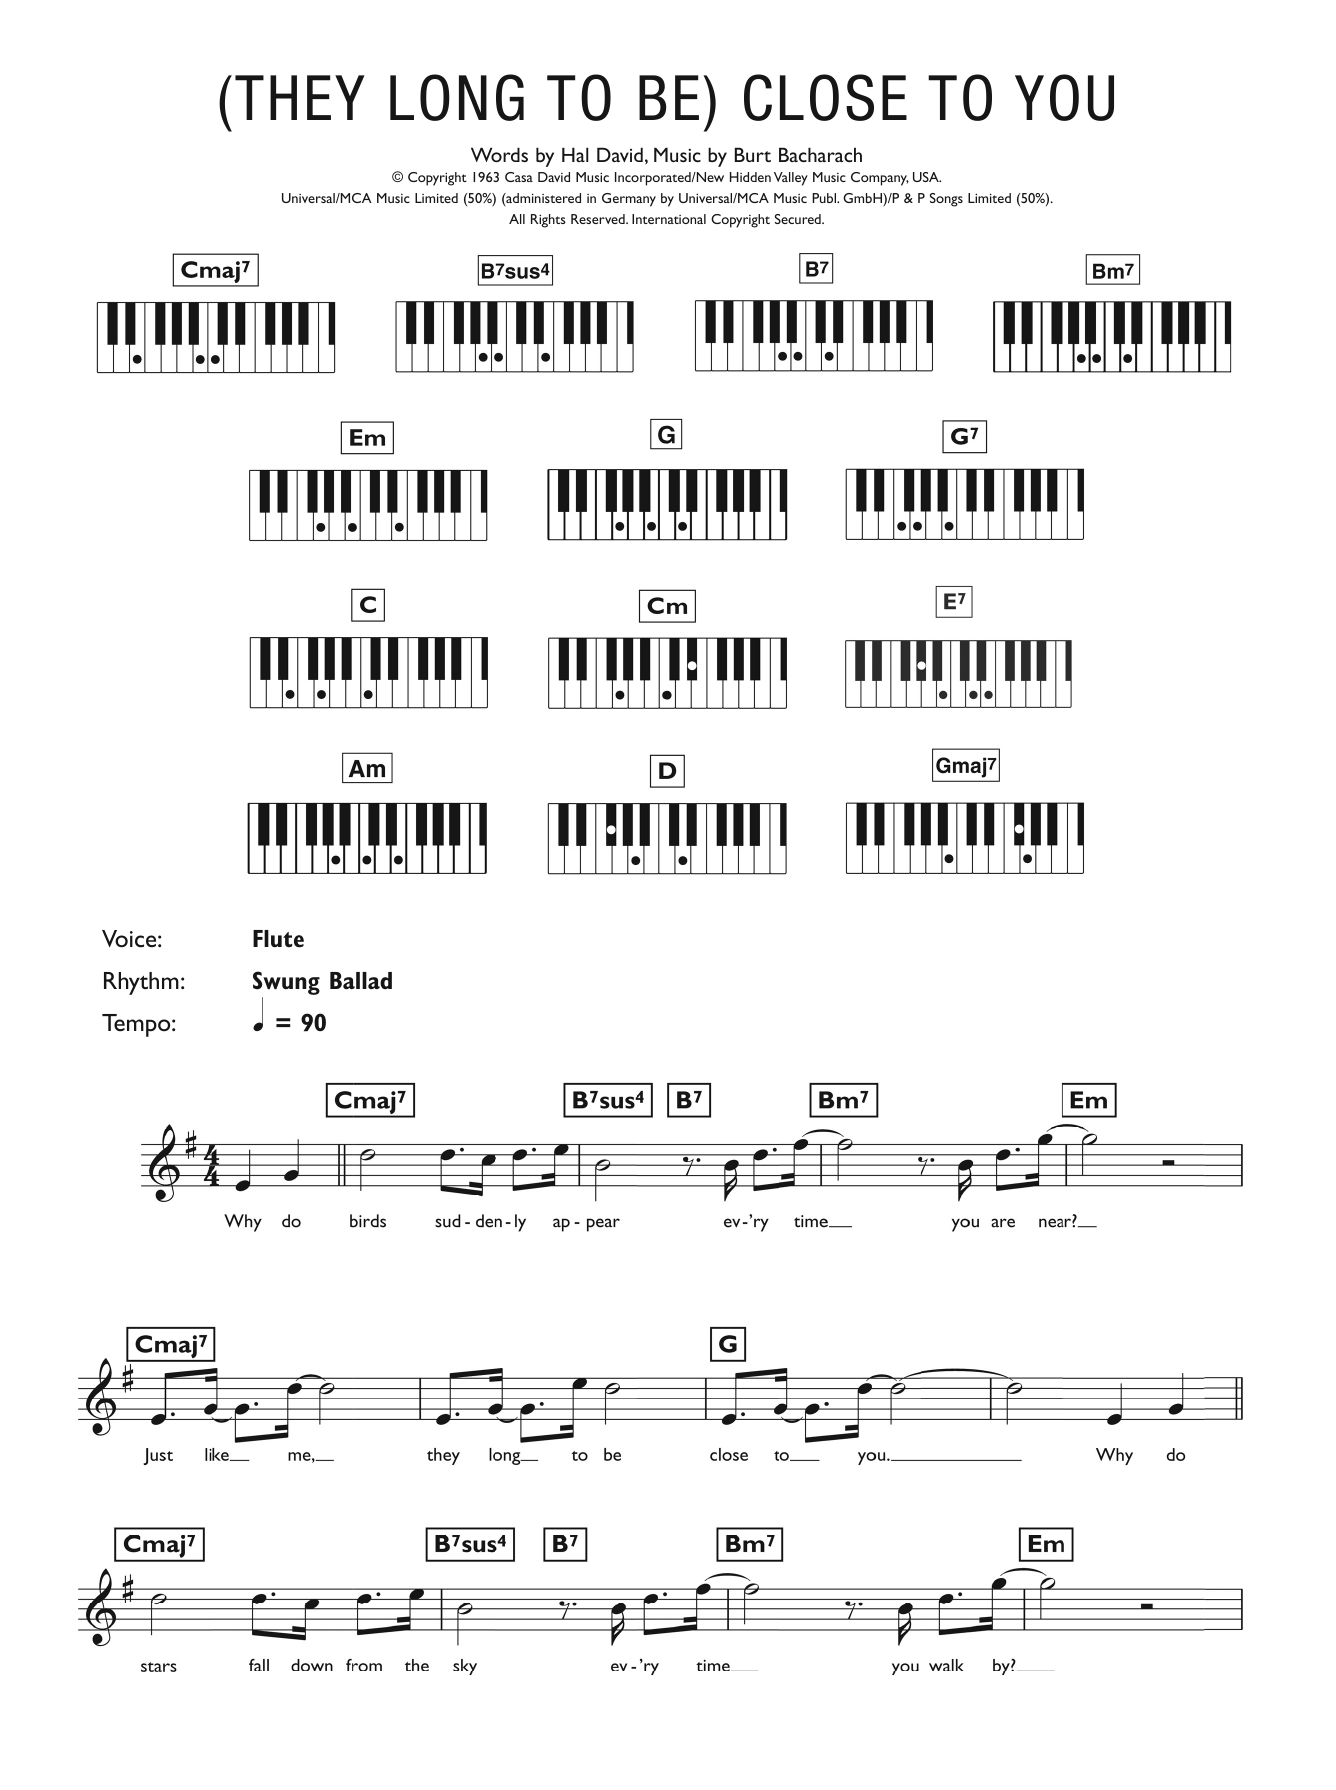 Download Carpenters Close To You (They Long To Be) Sheet Music